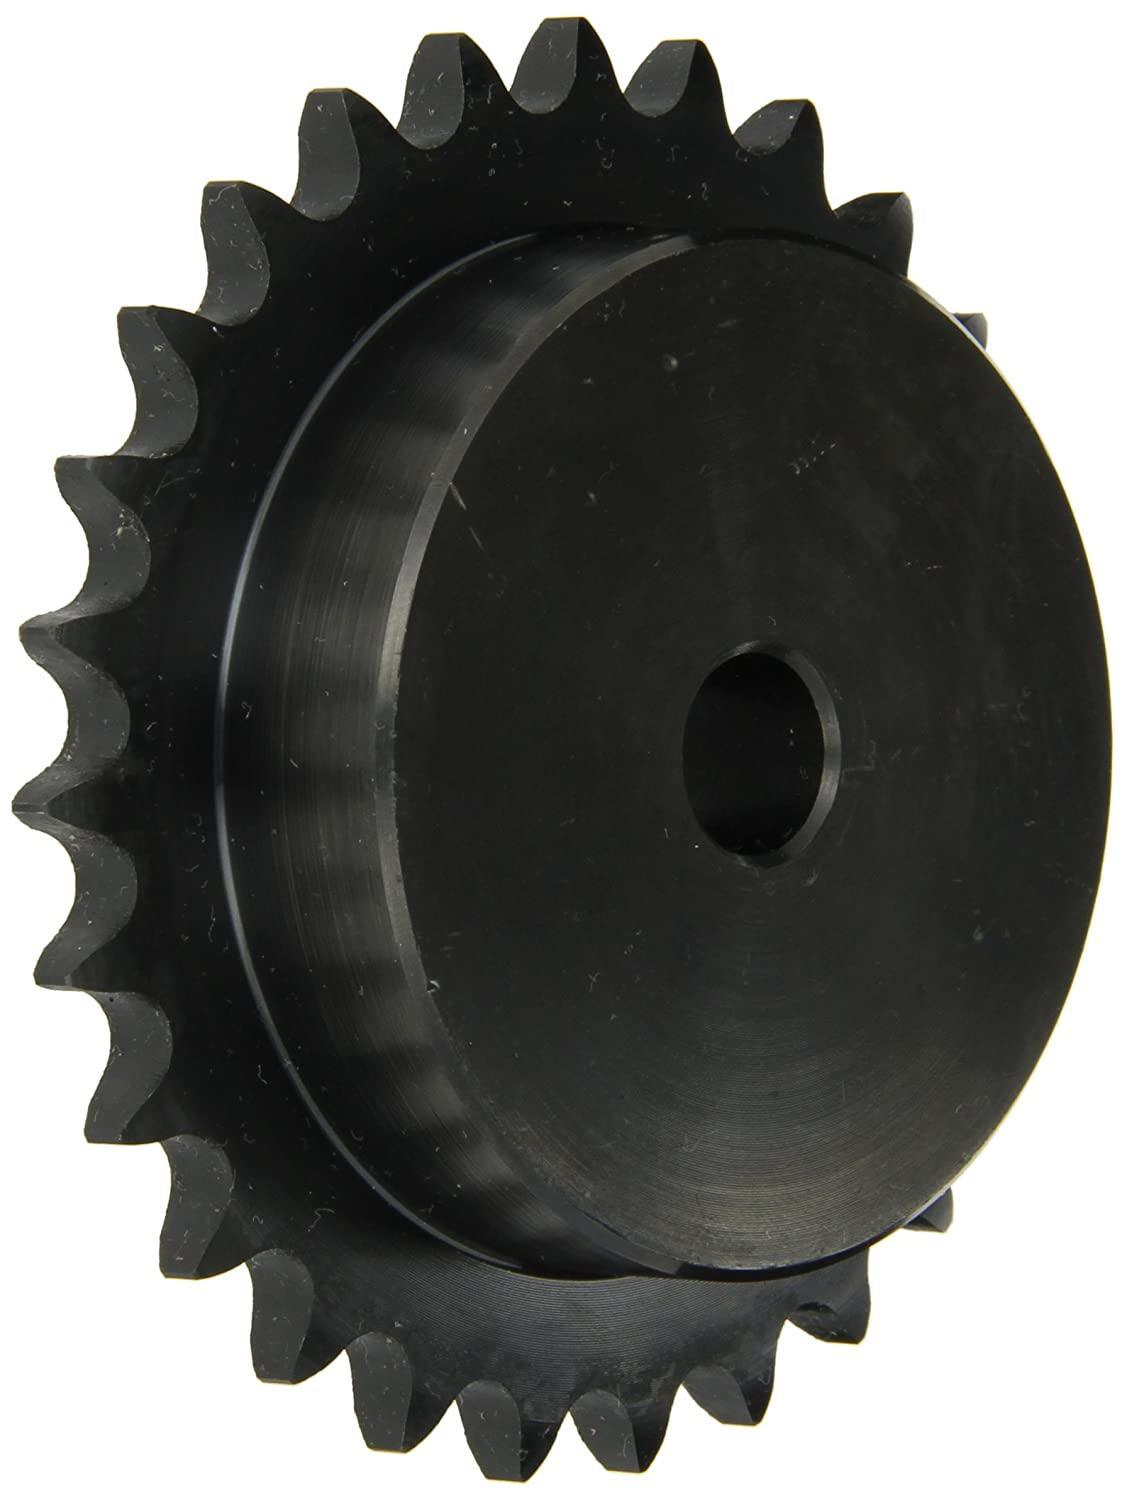 100B24 Roller Chain Sprocket With Stock Bore - Forces Inc